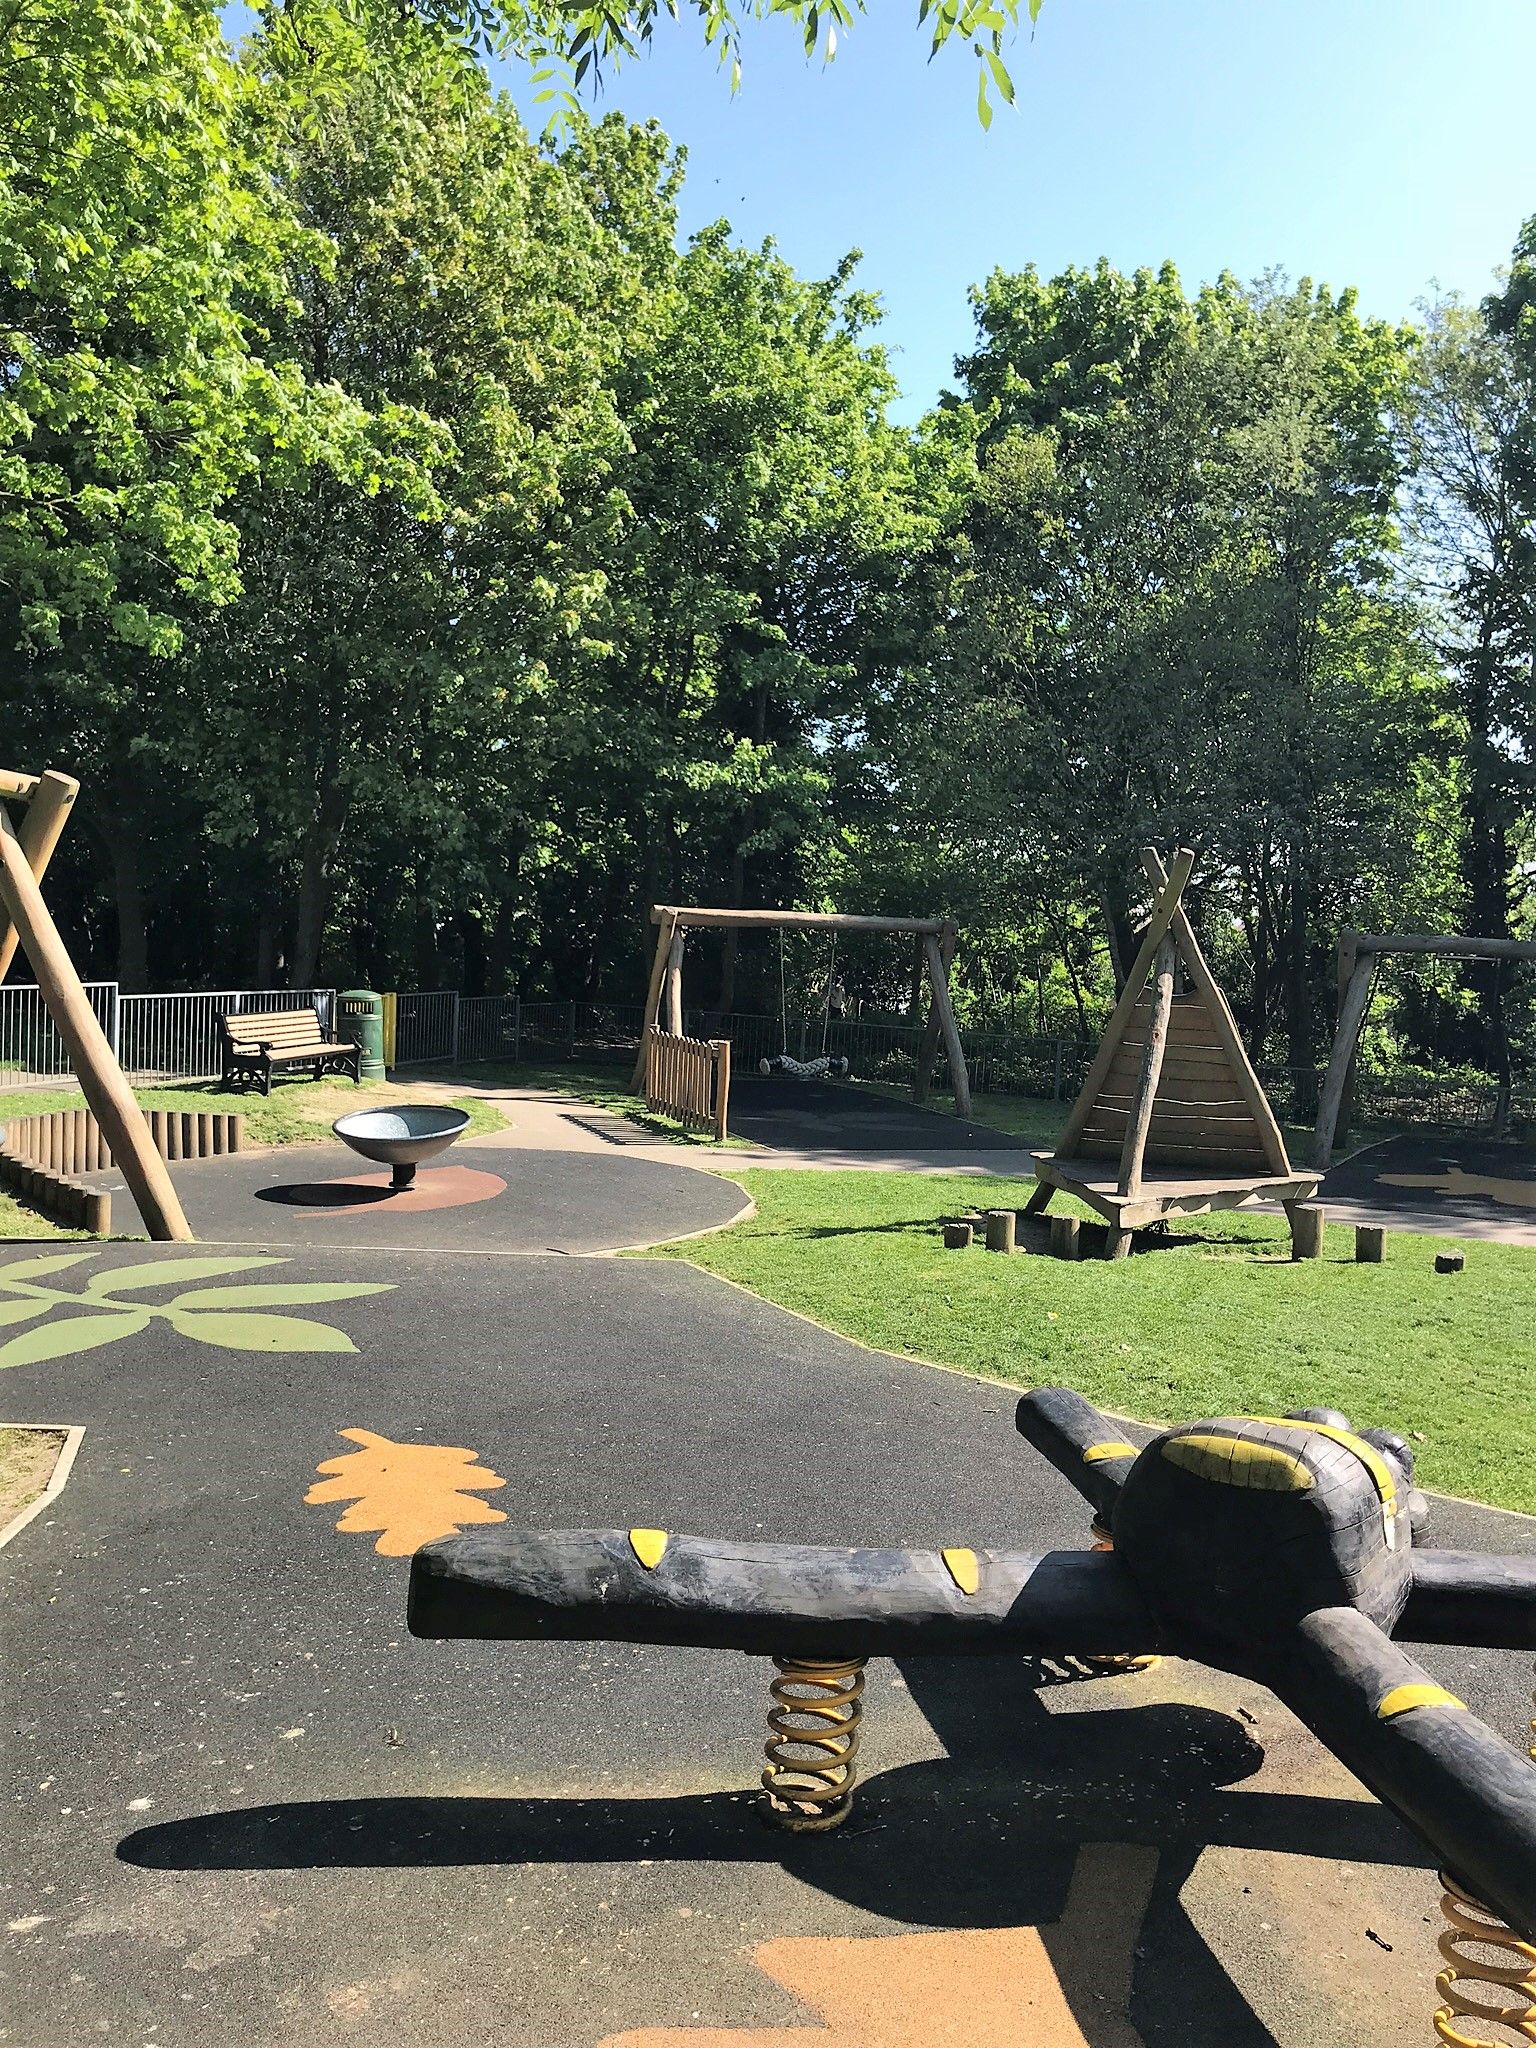 Children's play area equipment; bouncy bugs and swings.